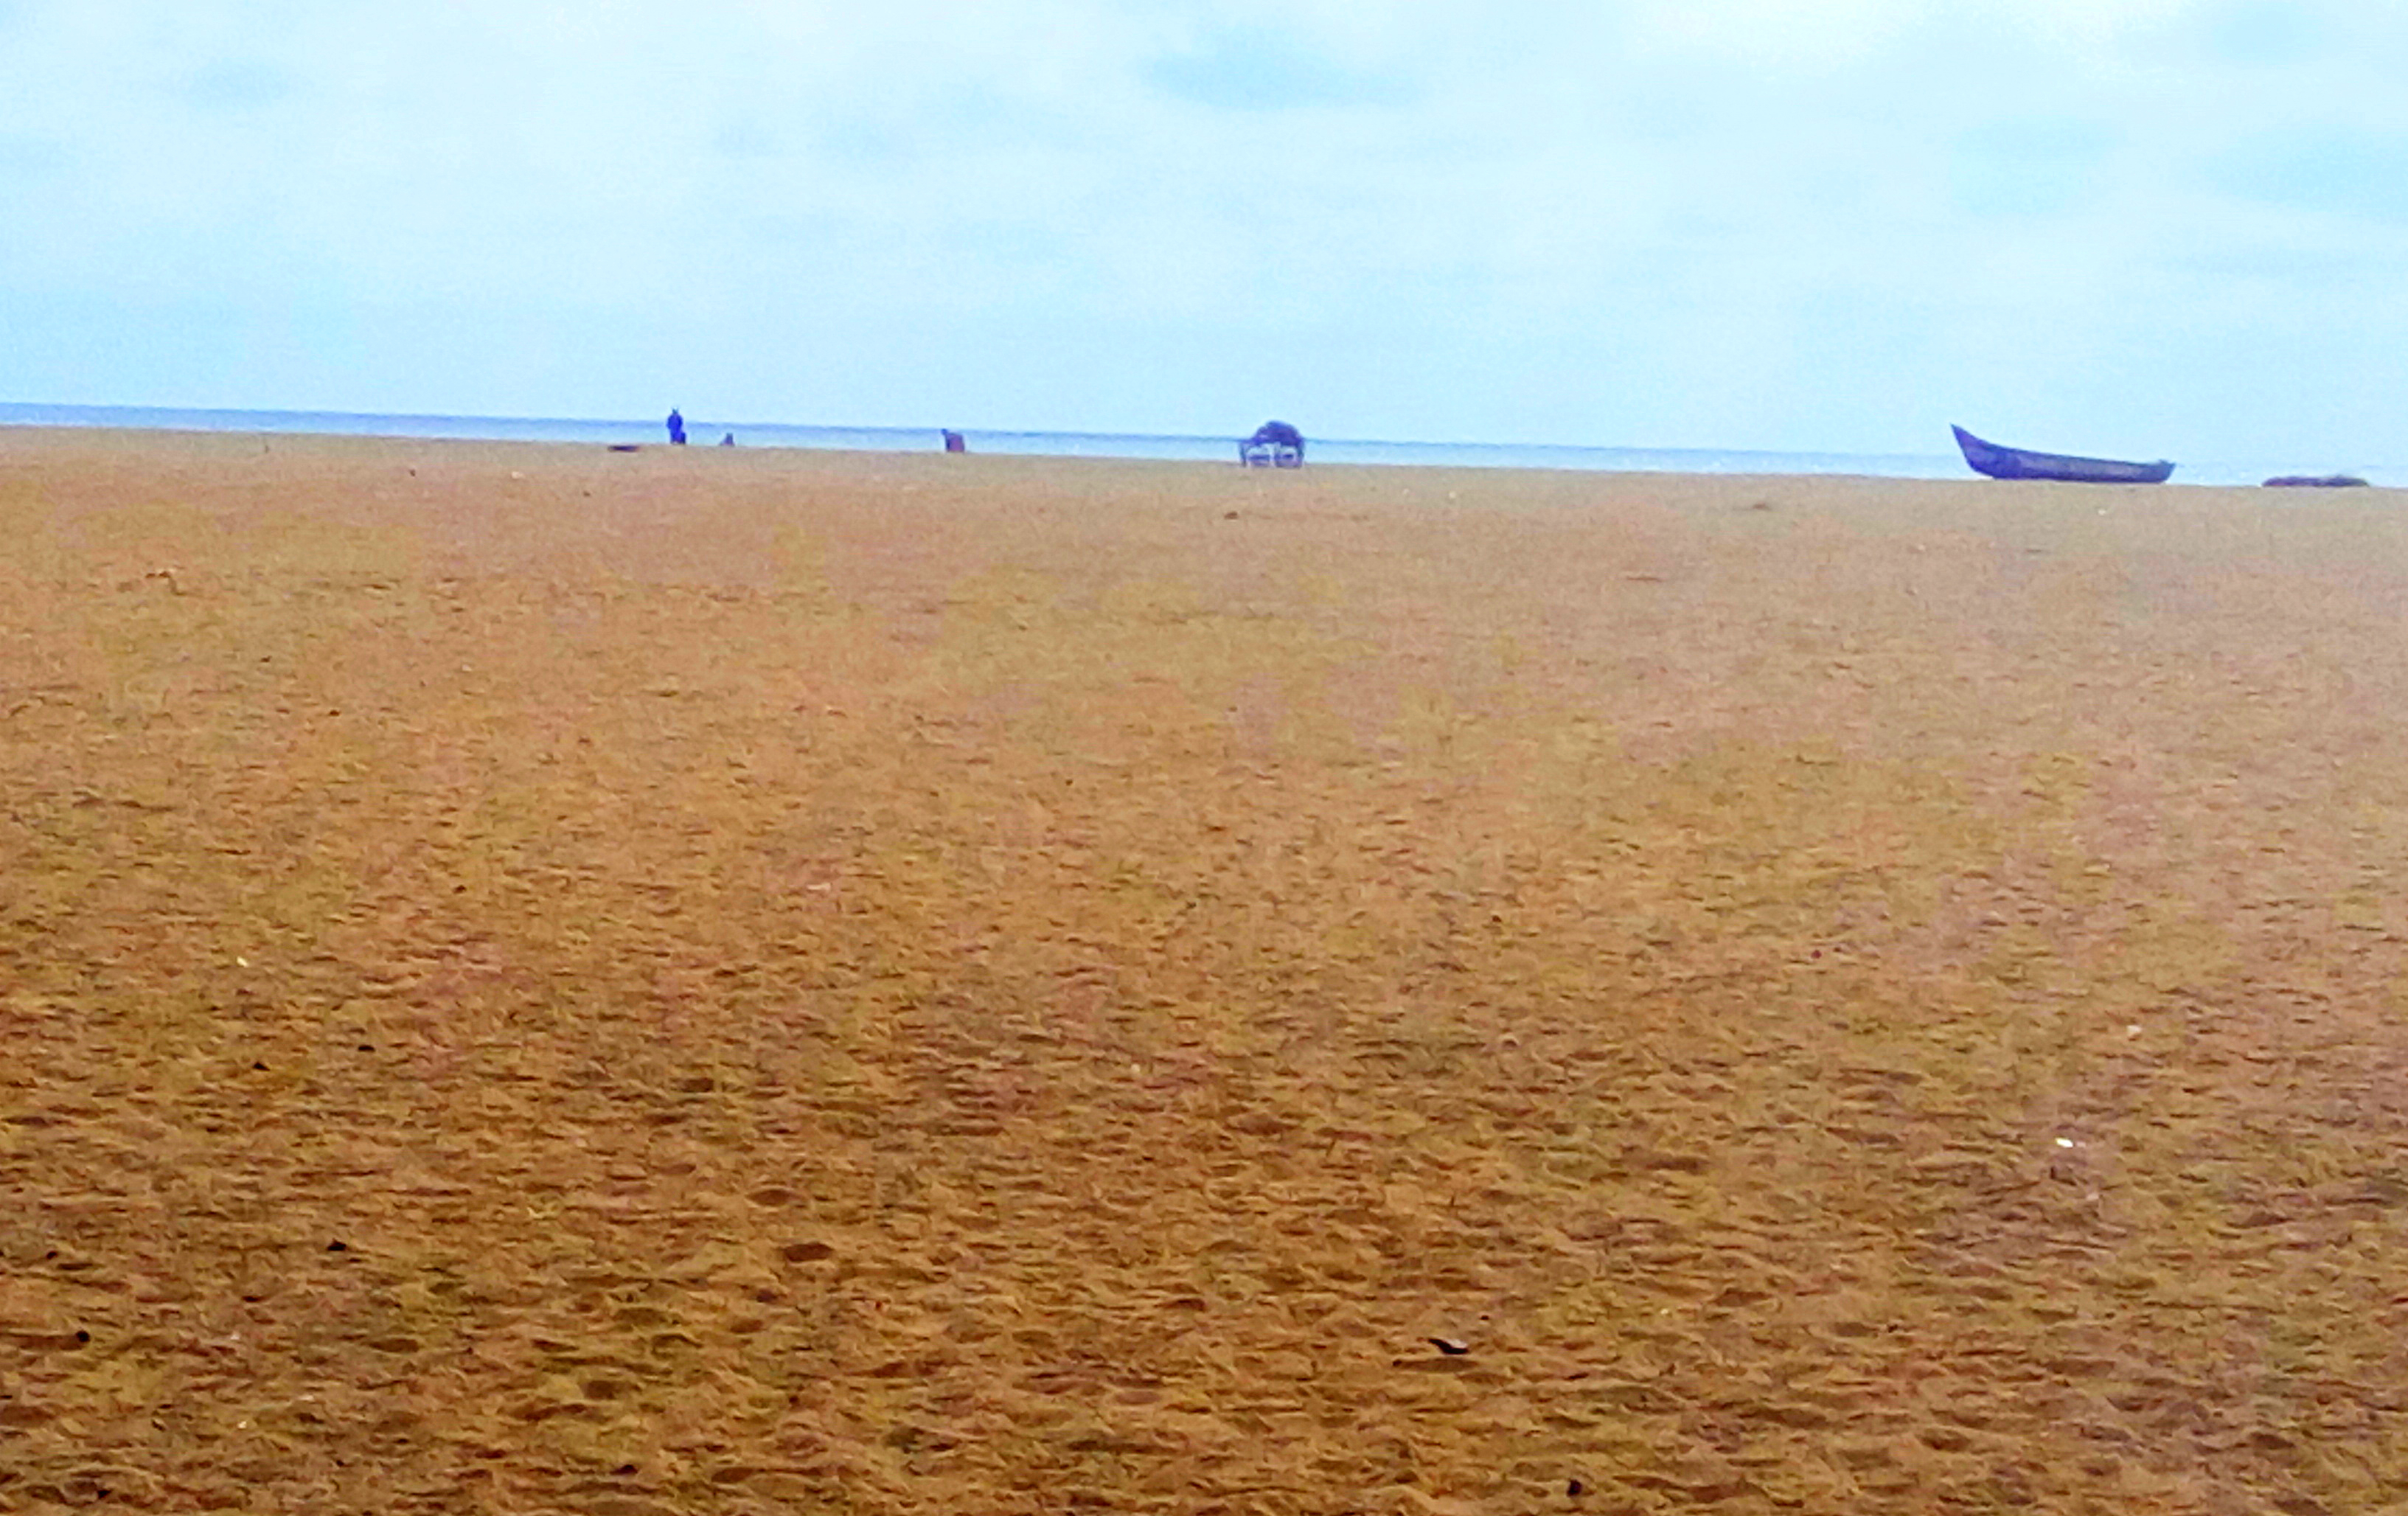 Sands on Beach - A view of a Beach with dry sands